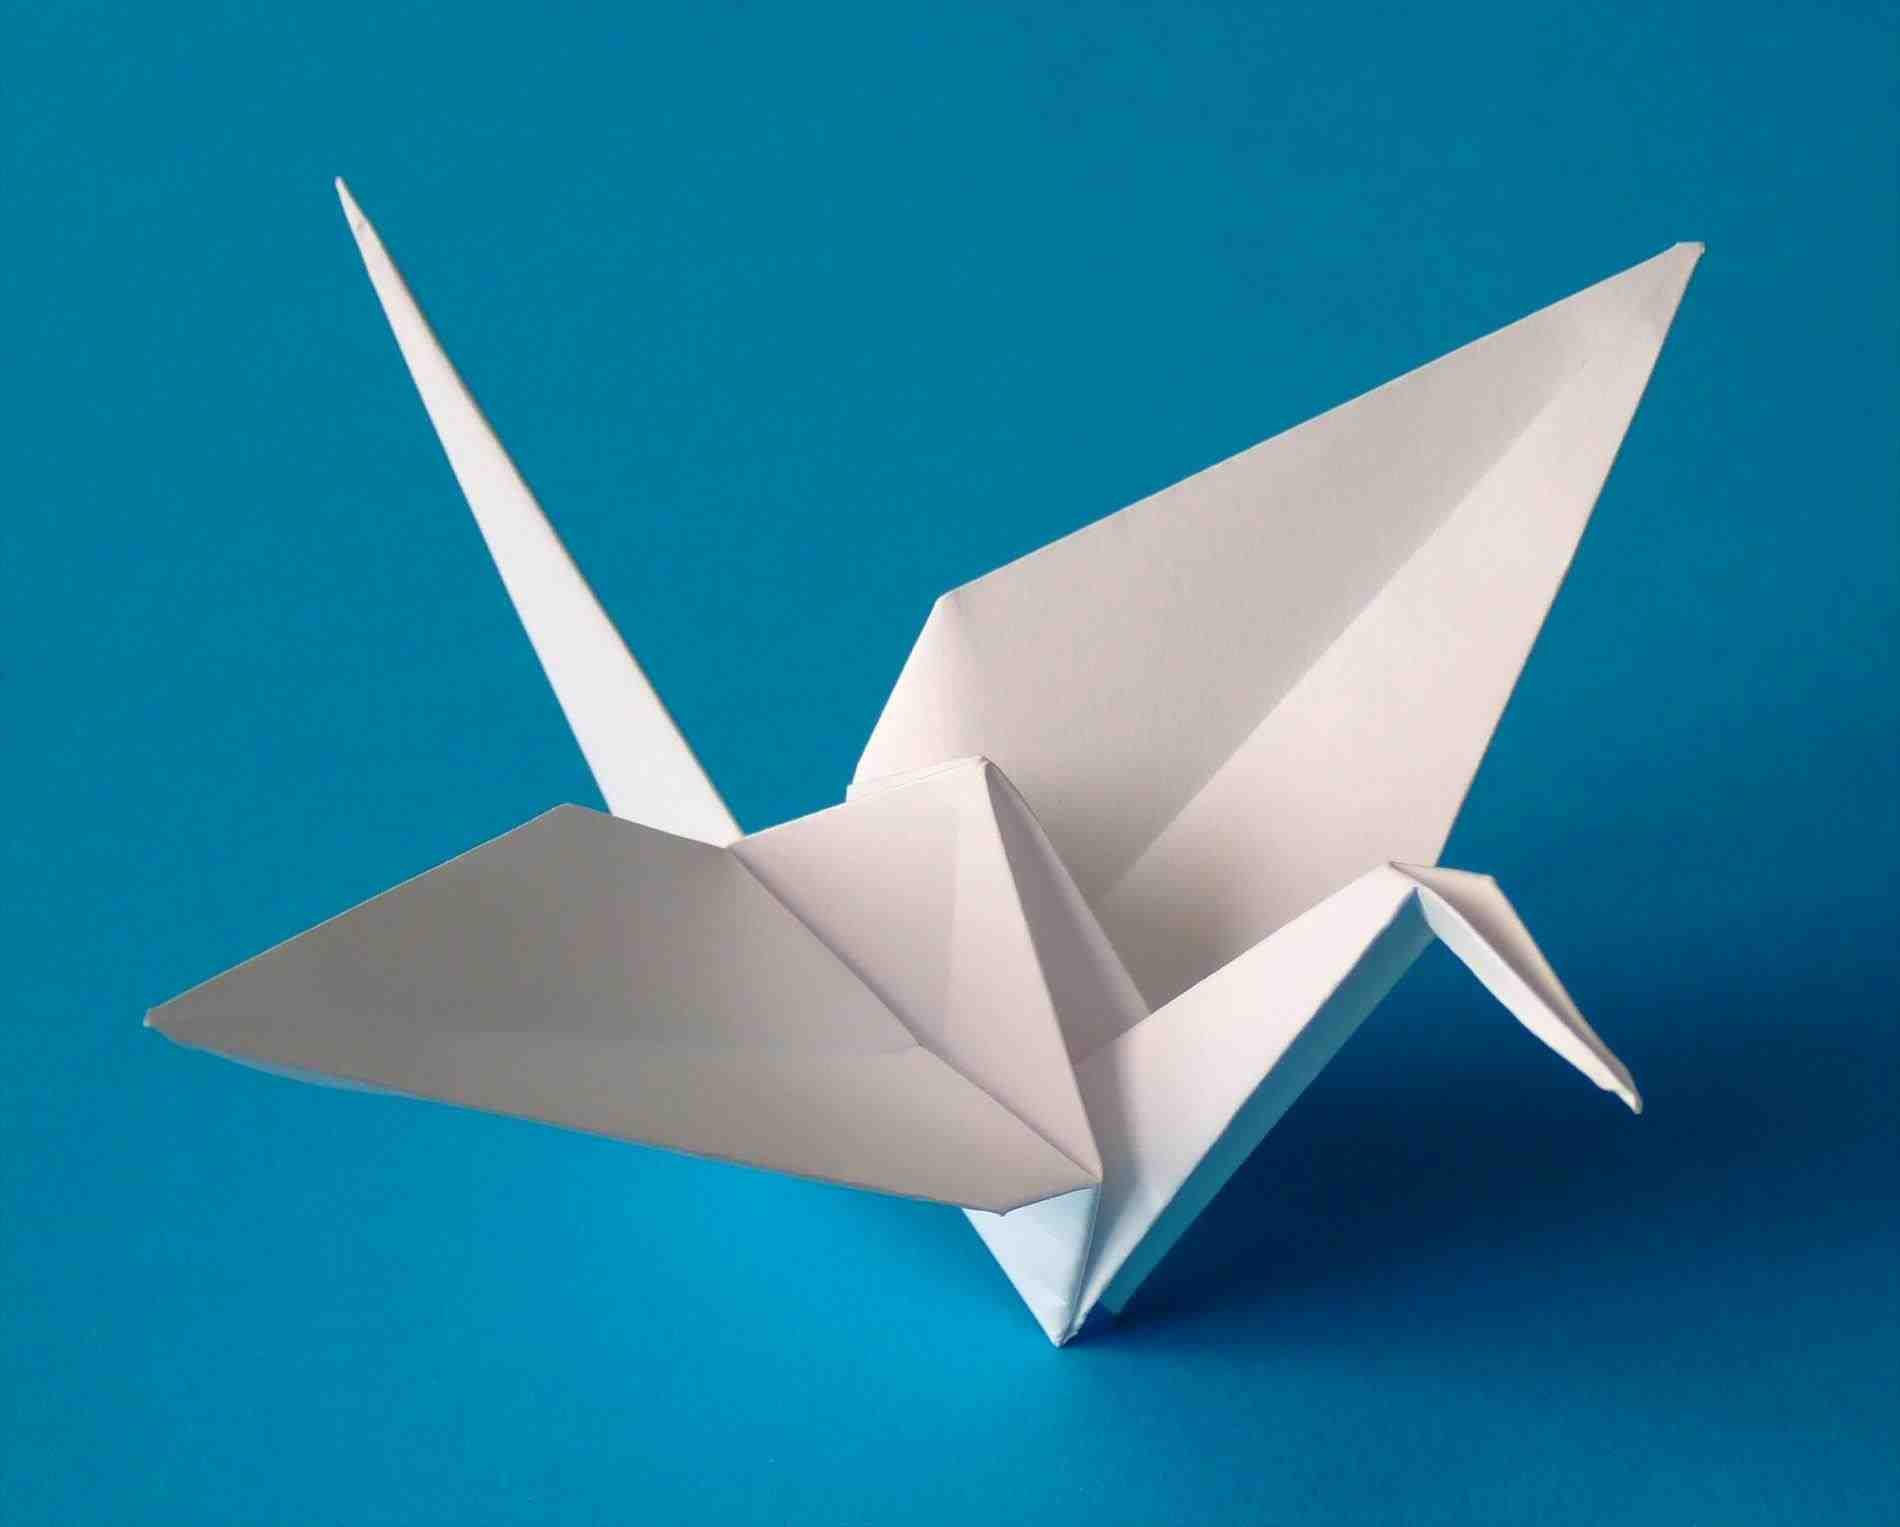 How To Make An Origami Fish To Make An Origami Fish Unique Paper Folding Ideas On Unique Simple